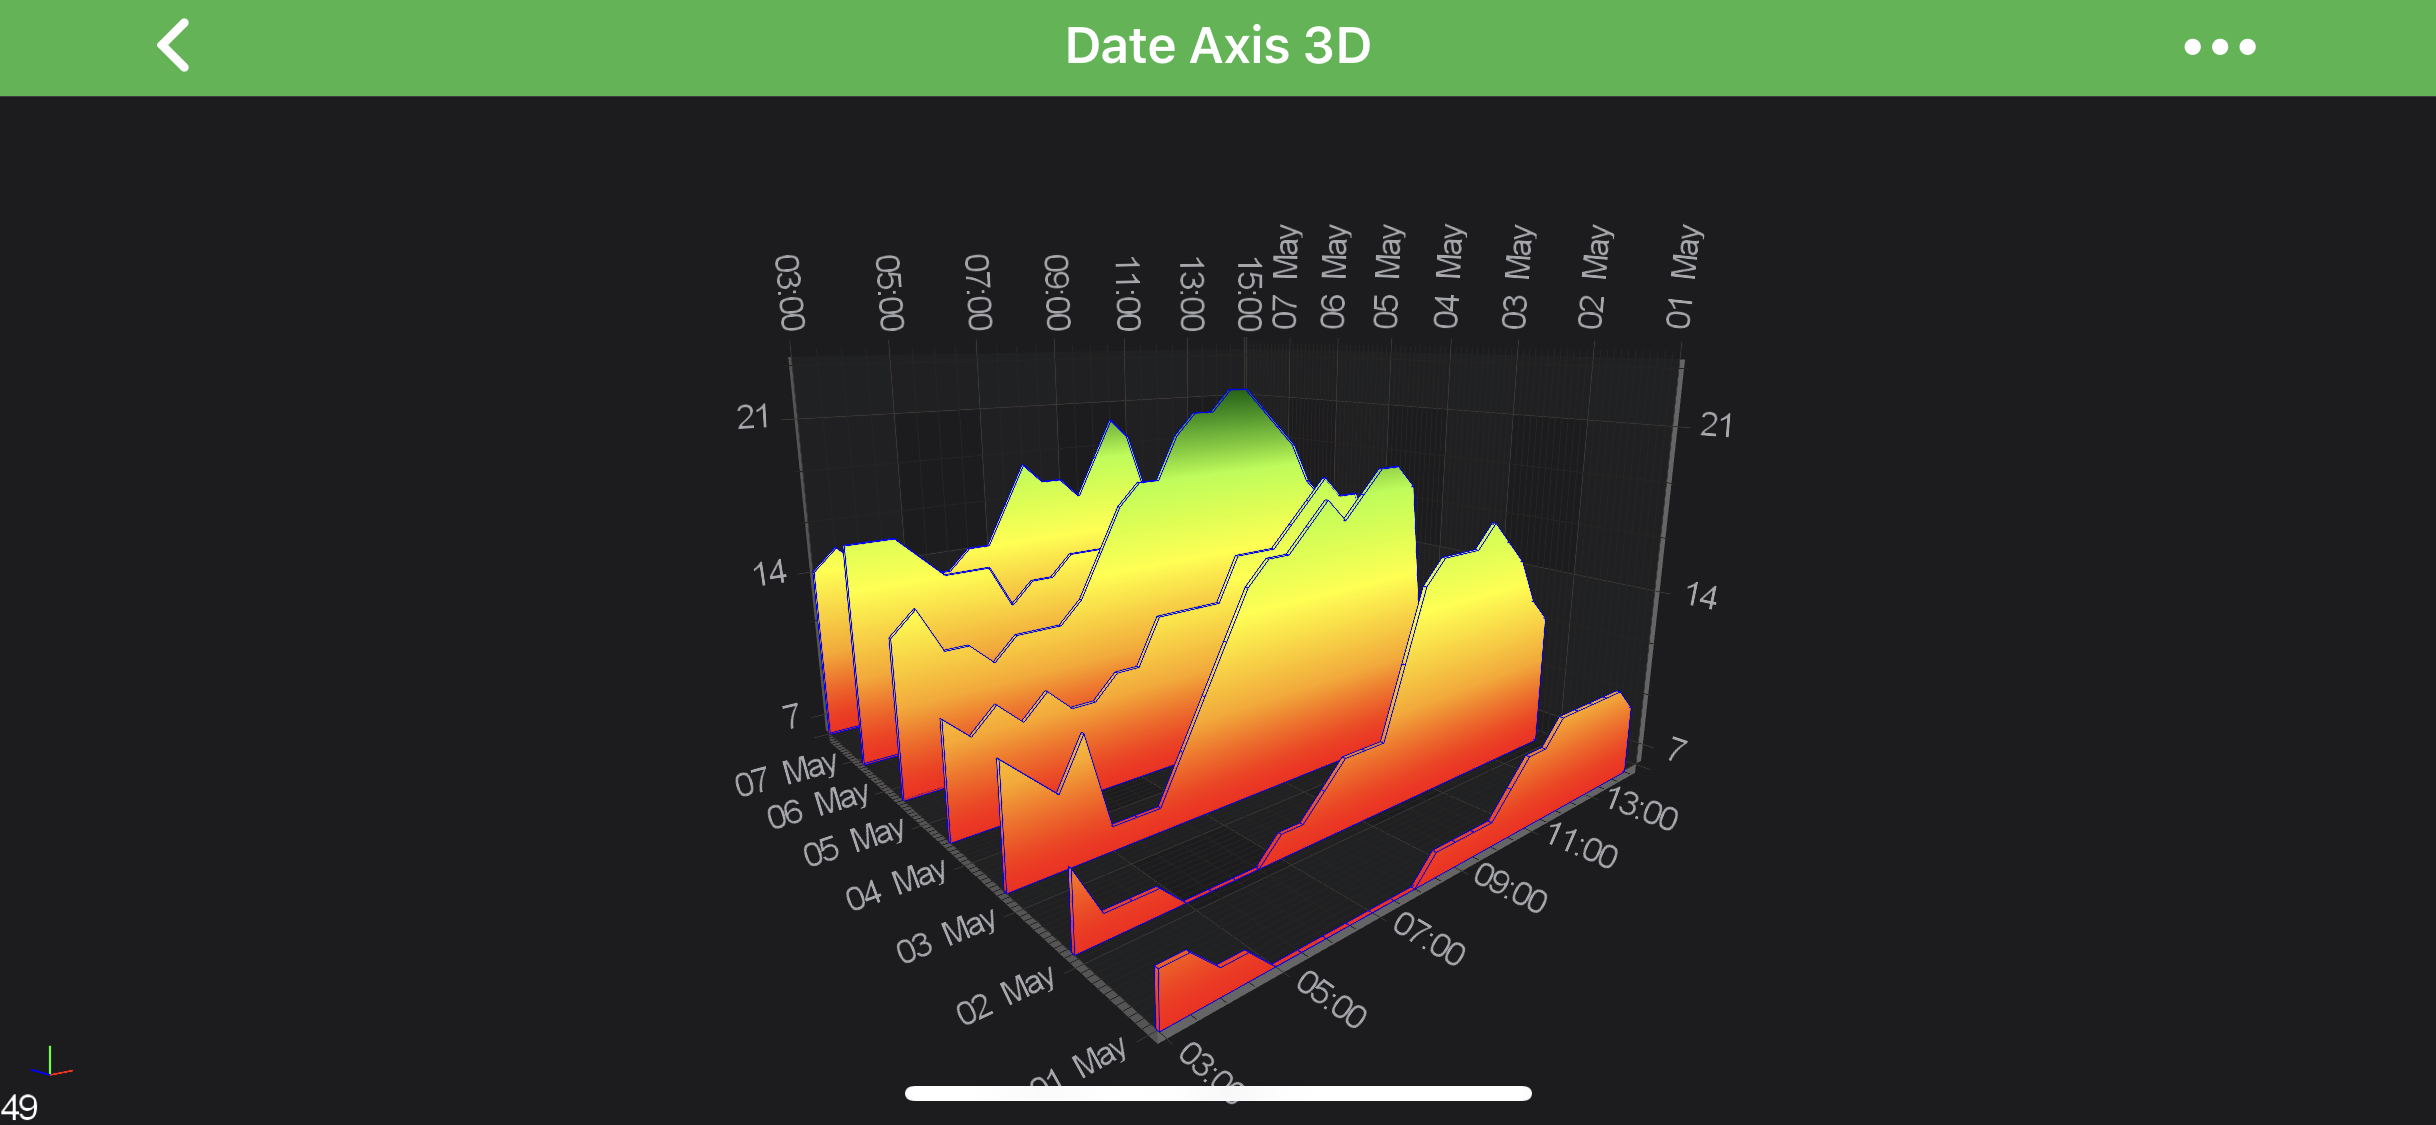 Date Axis 3D